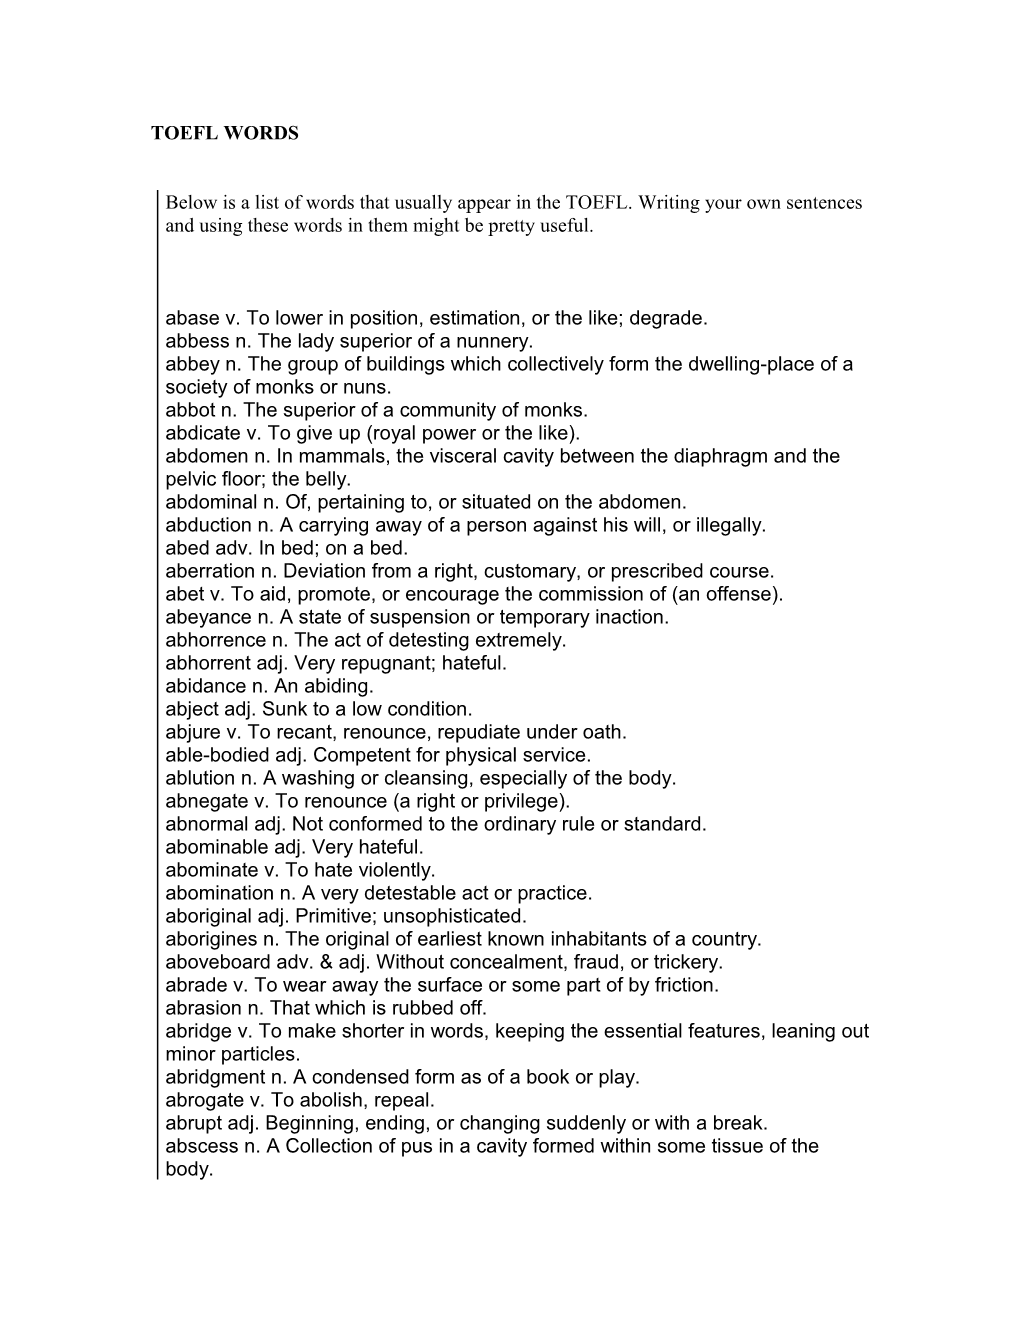 Below Is a List of Words That Usually Appear in the TOEFL. Writing Your Own Sentences And